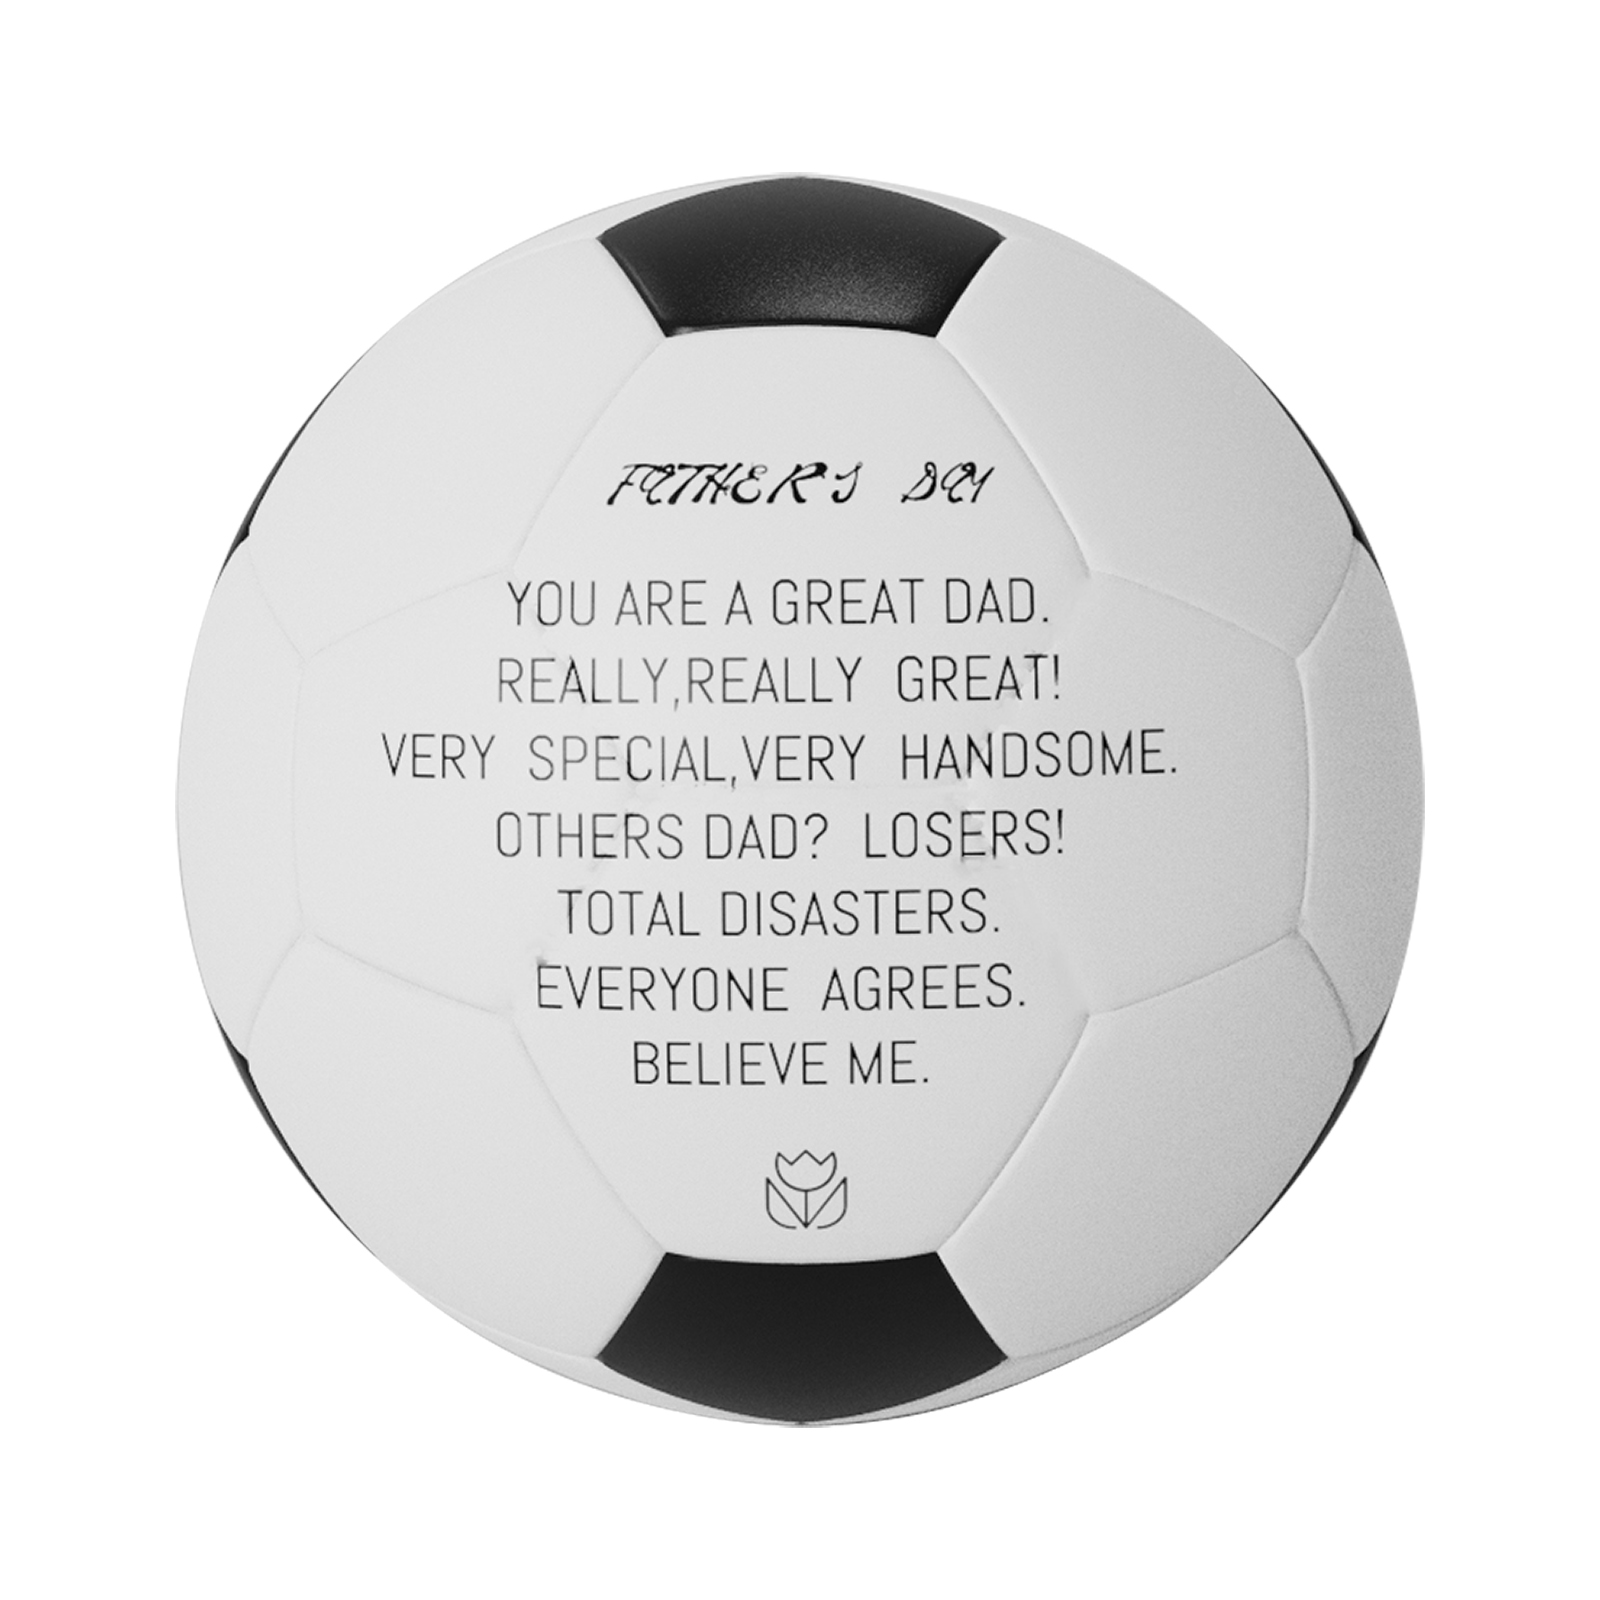 Personalized Custom Father's Day Gift Soccer Ball For Dad